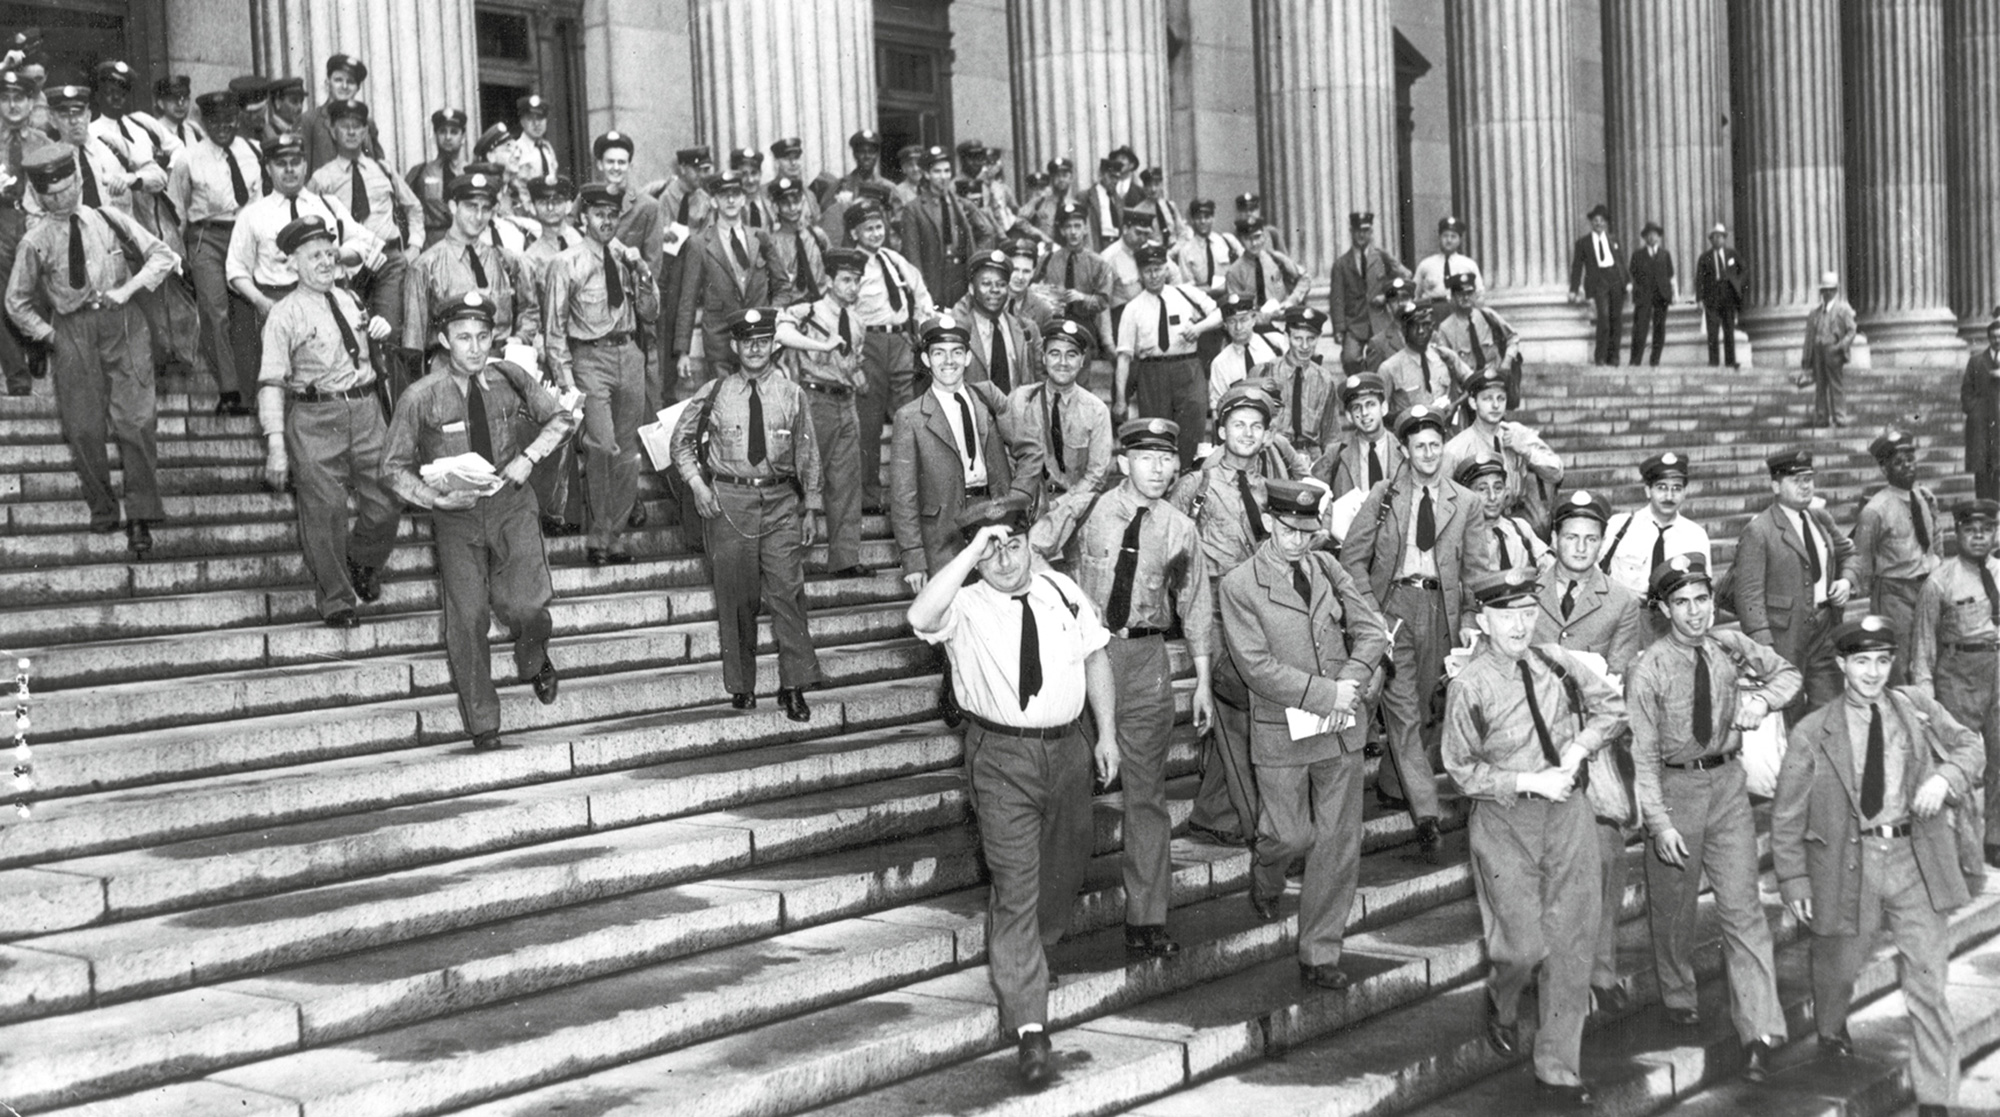 A nineteen thirty-six photograph of letter carriers heading out on their rounds from New York City’s main post office.